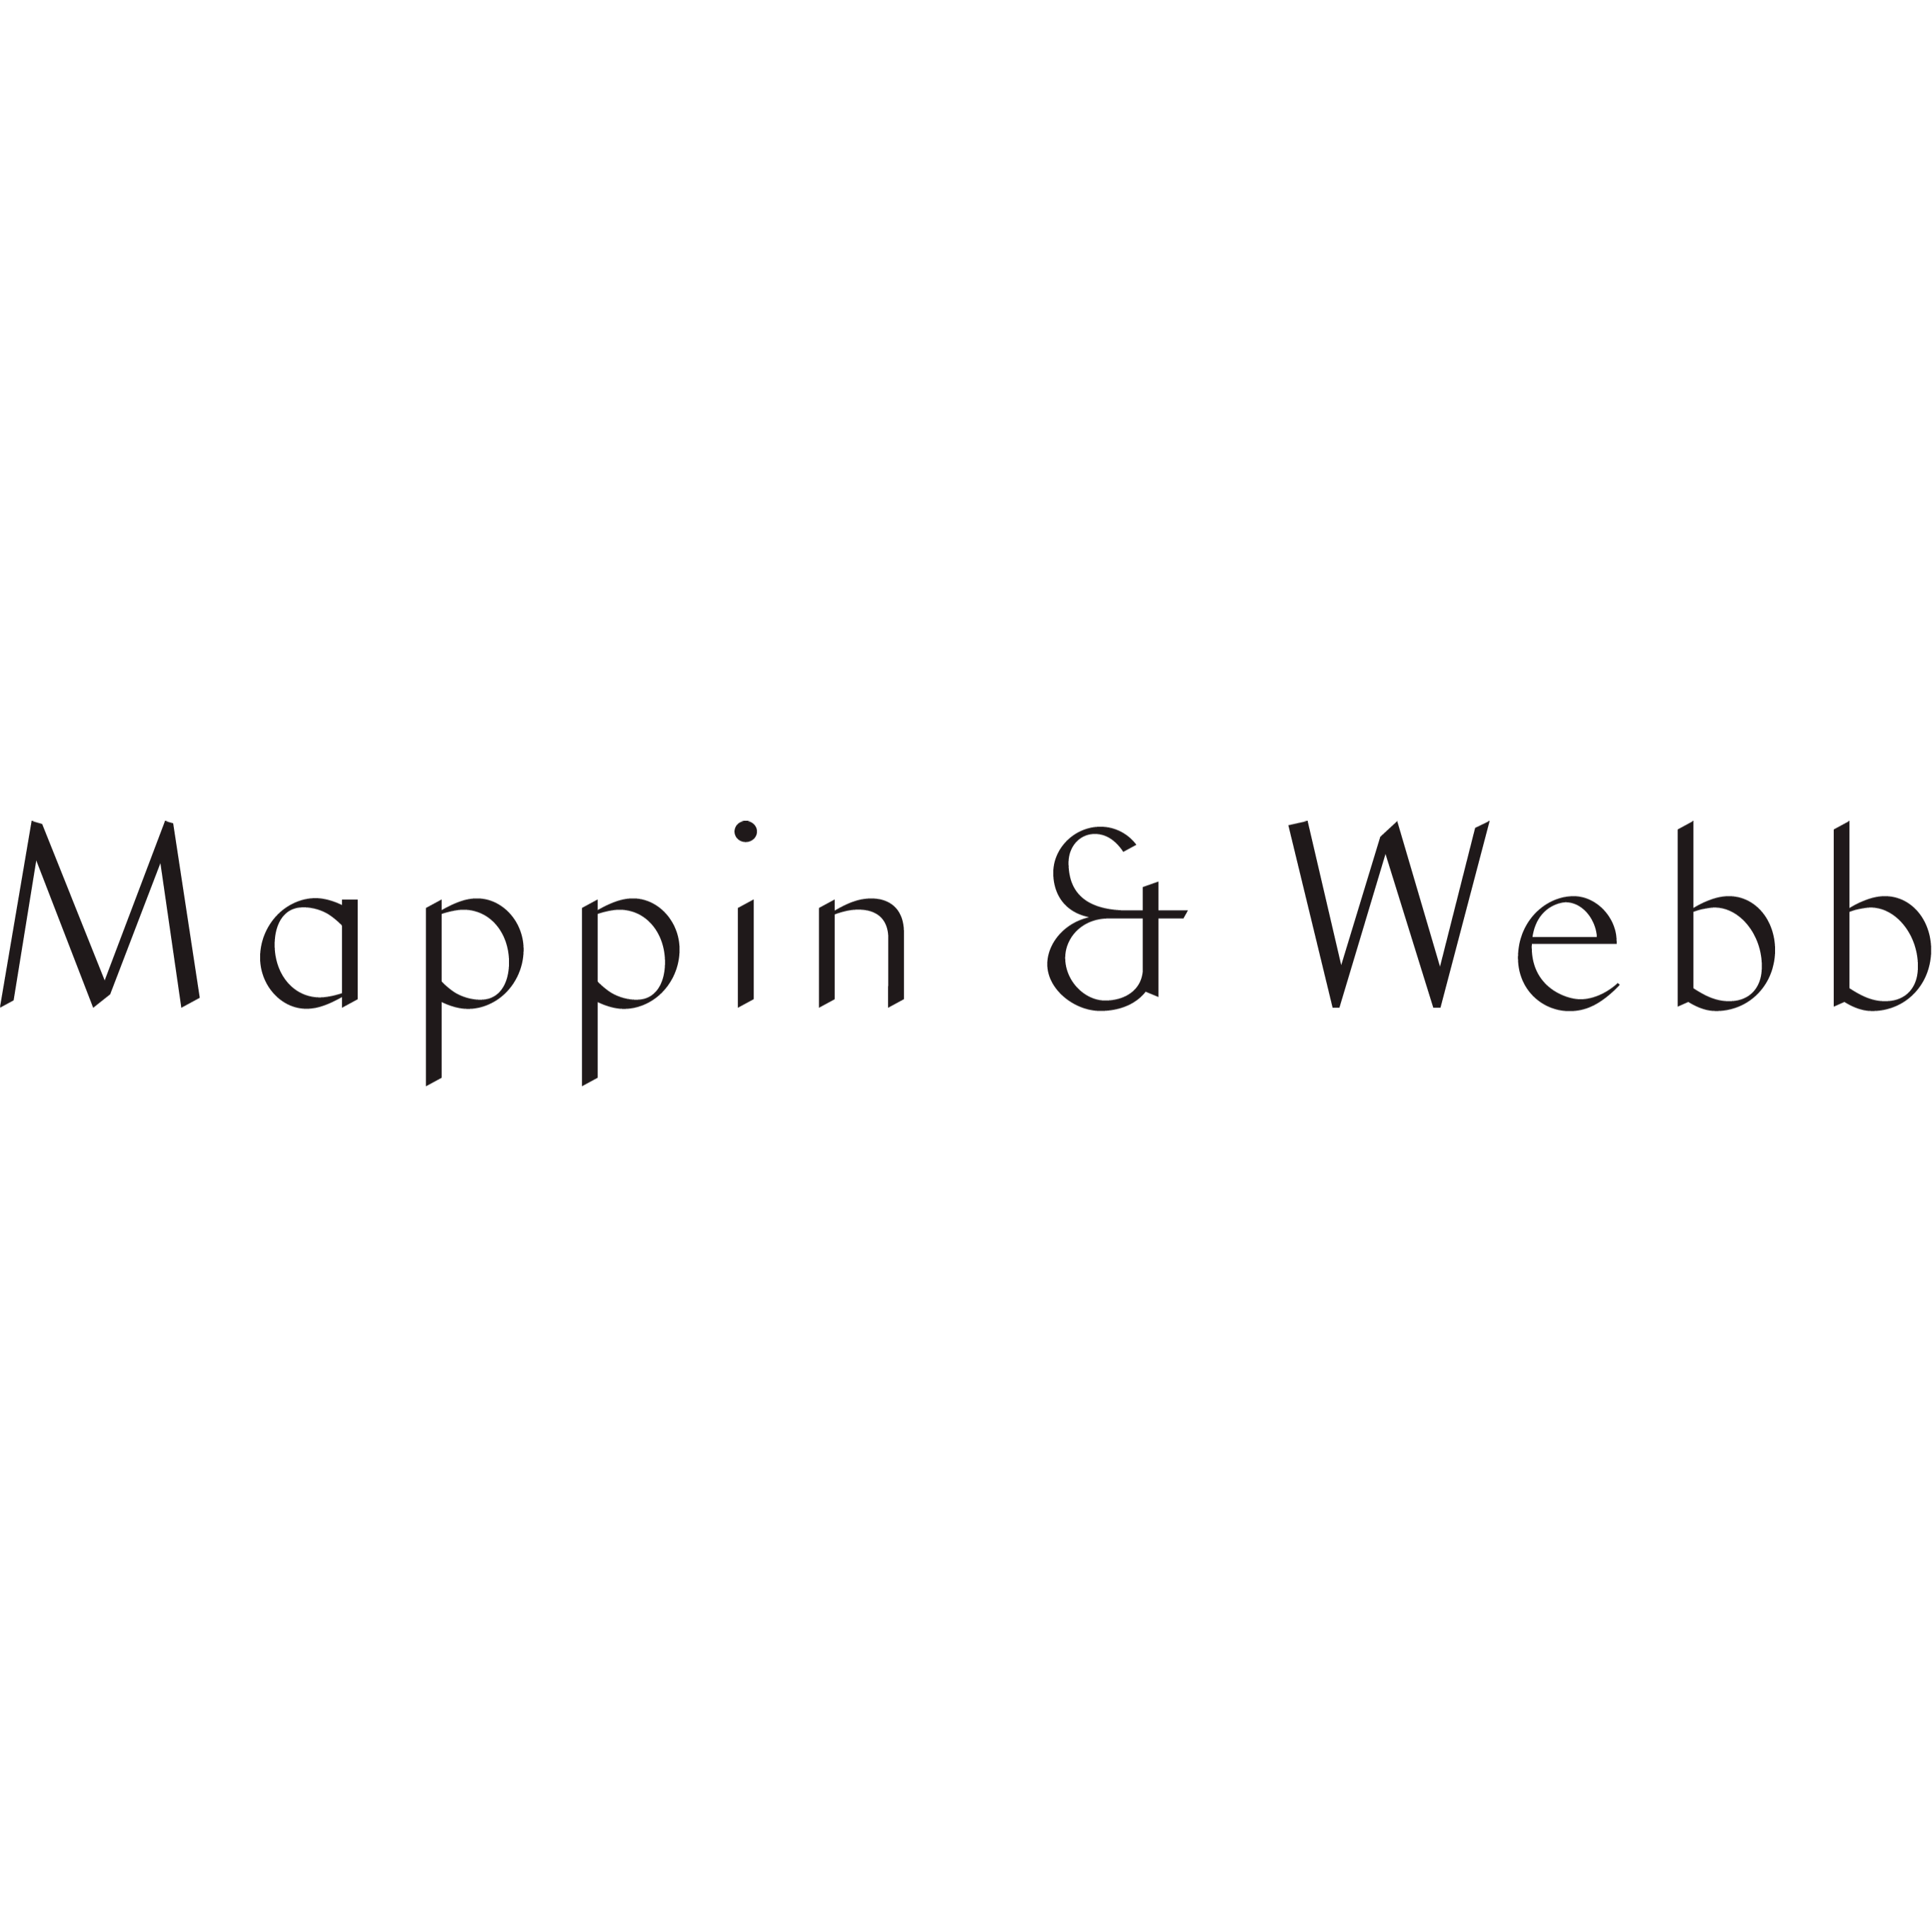 Mappin & Webb - Auchterarder, Perthshire PH3 1NF - 01764 663383 | ShowMeLocal.com